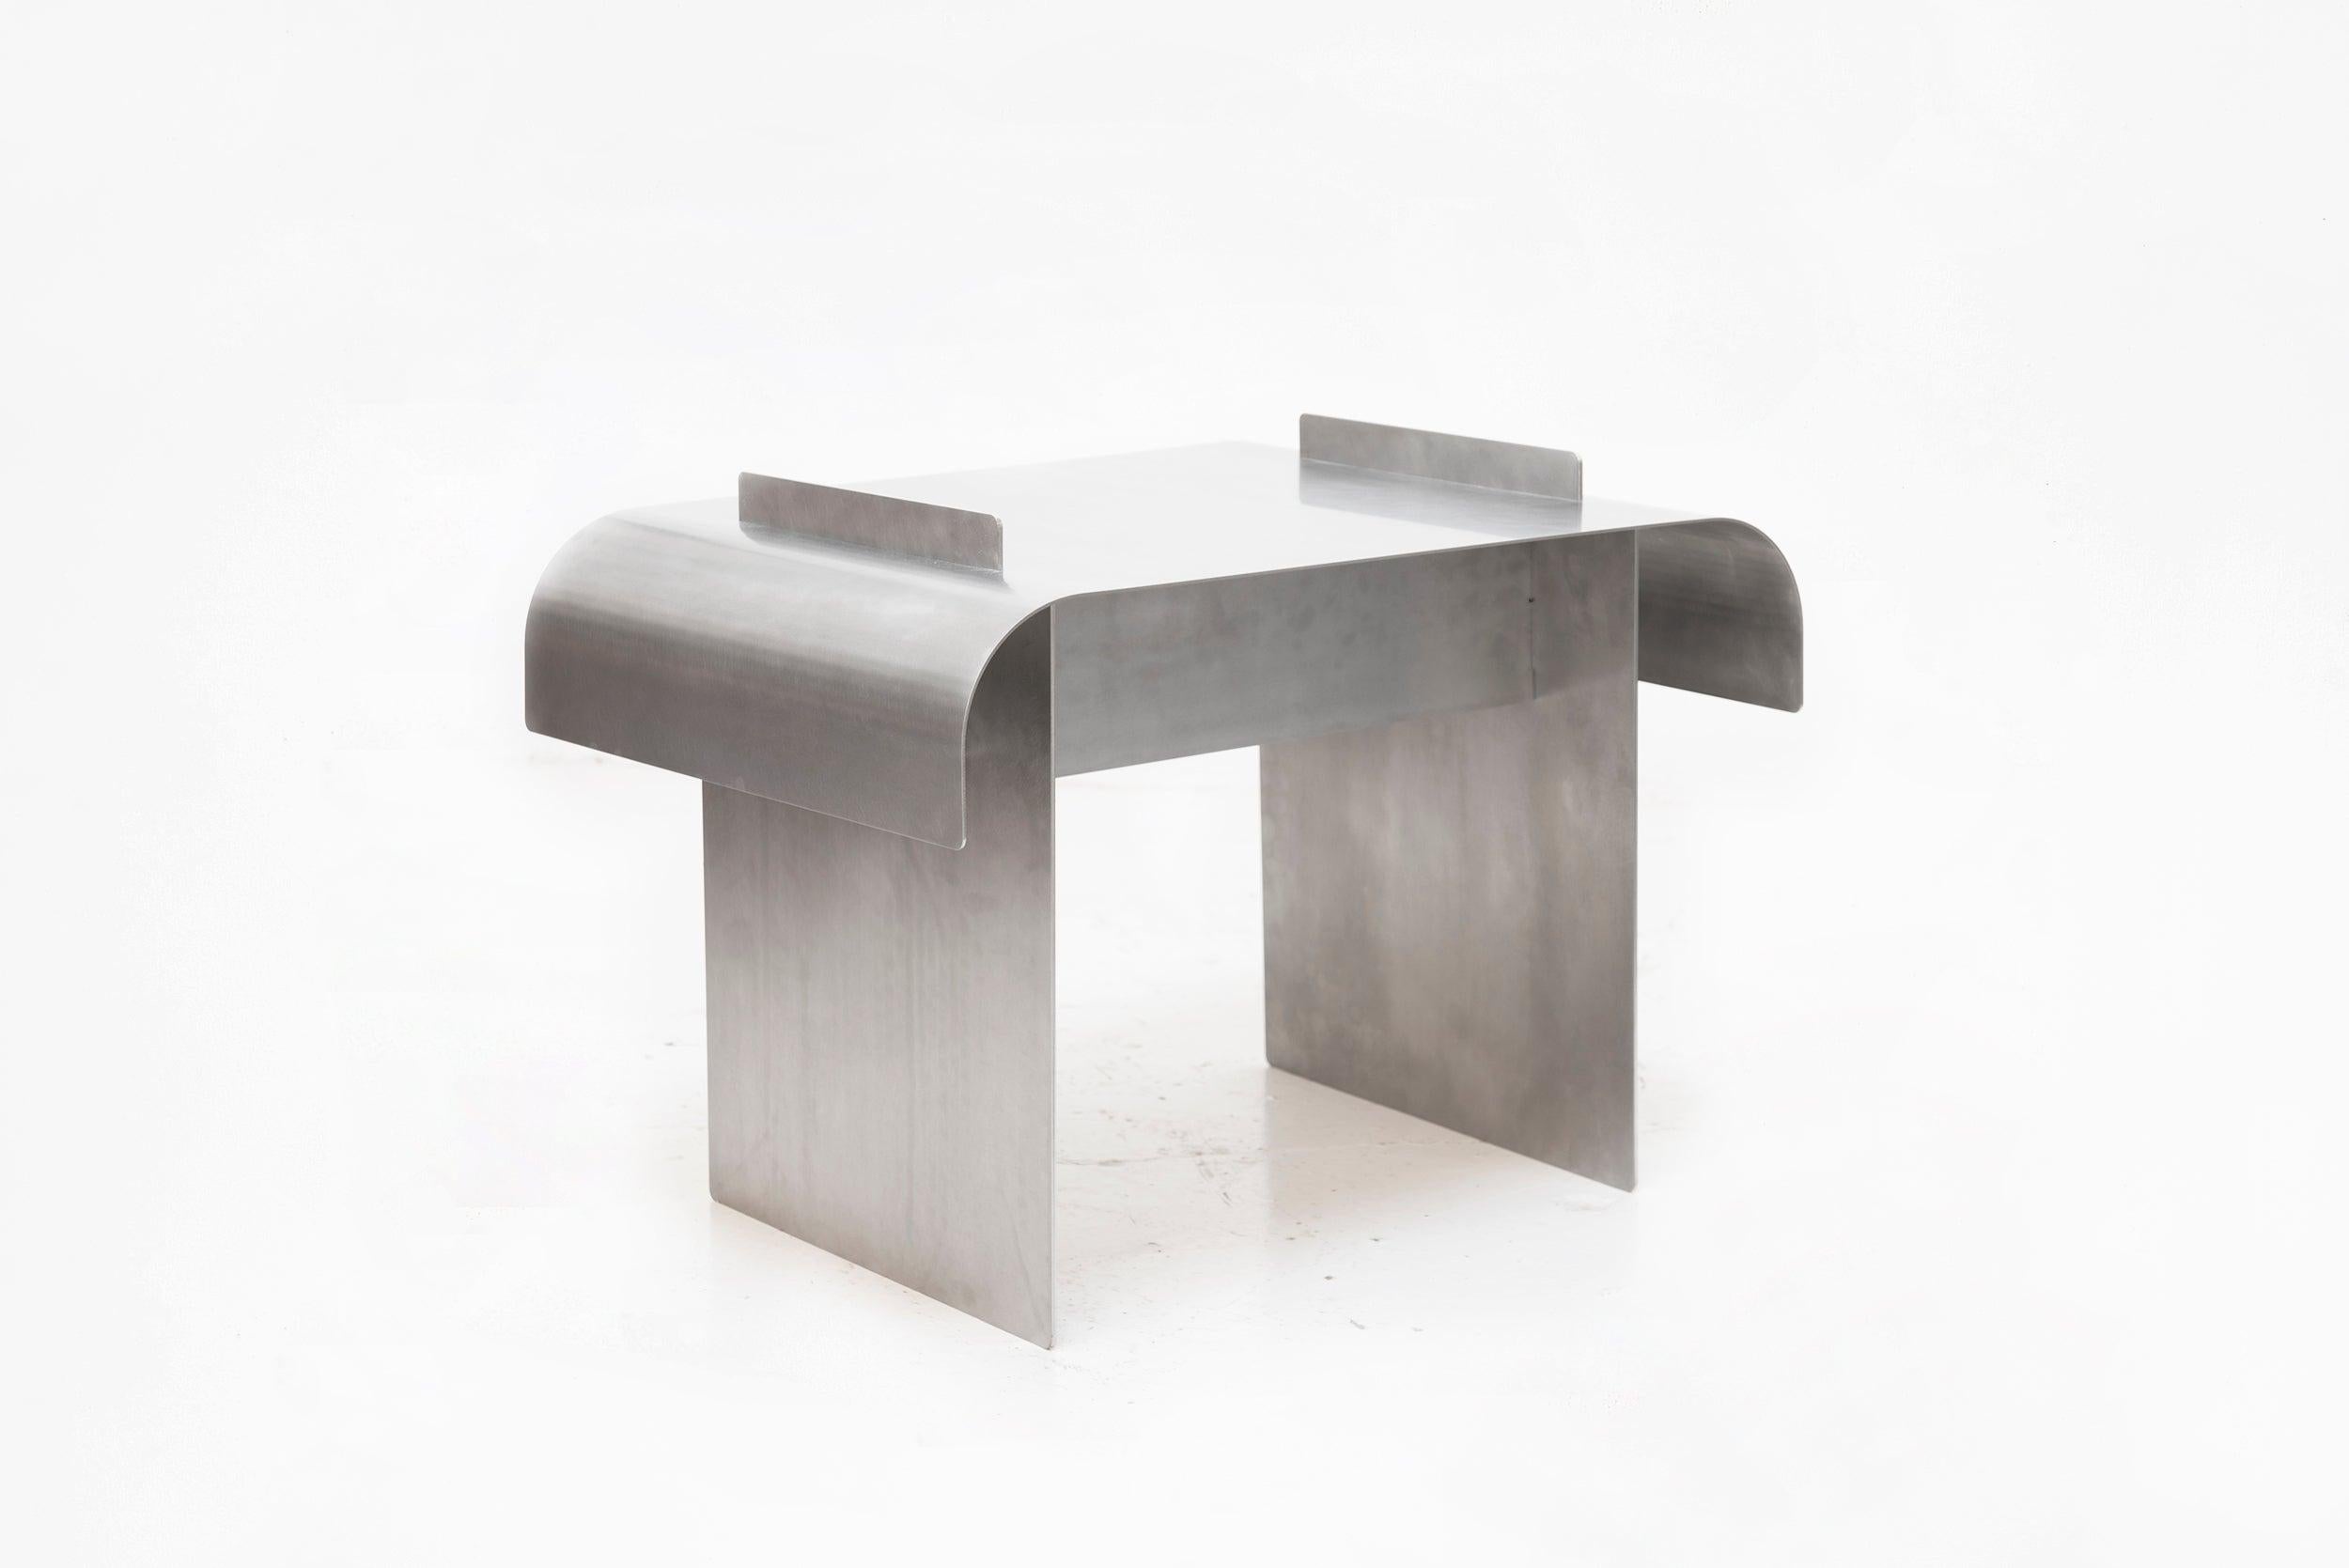 Maria Tyakina
Bend table
Produced exclusively for side gallery The Netherlands, 2019
Stainless steel, hand brushed

Measurements
43 x 58 x 43h cm in 43 x 58 x 43h cm
Edition: Numbered edition

Biography
Navigating between art and design,